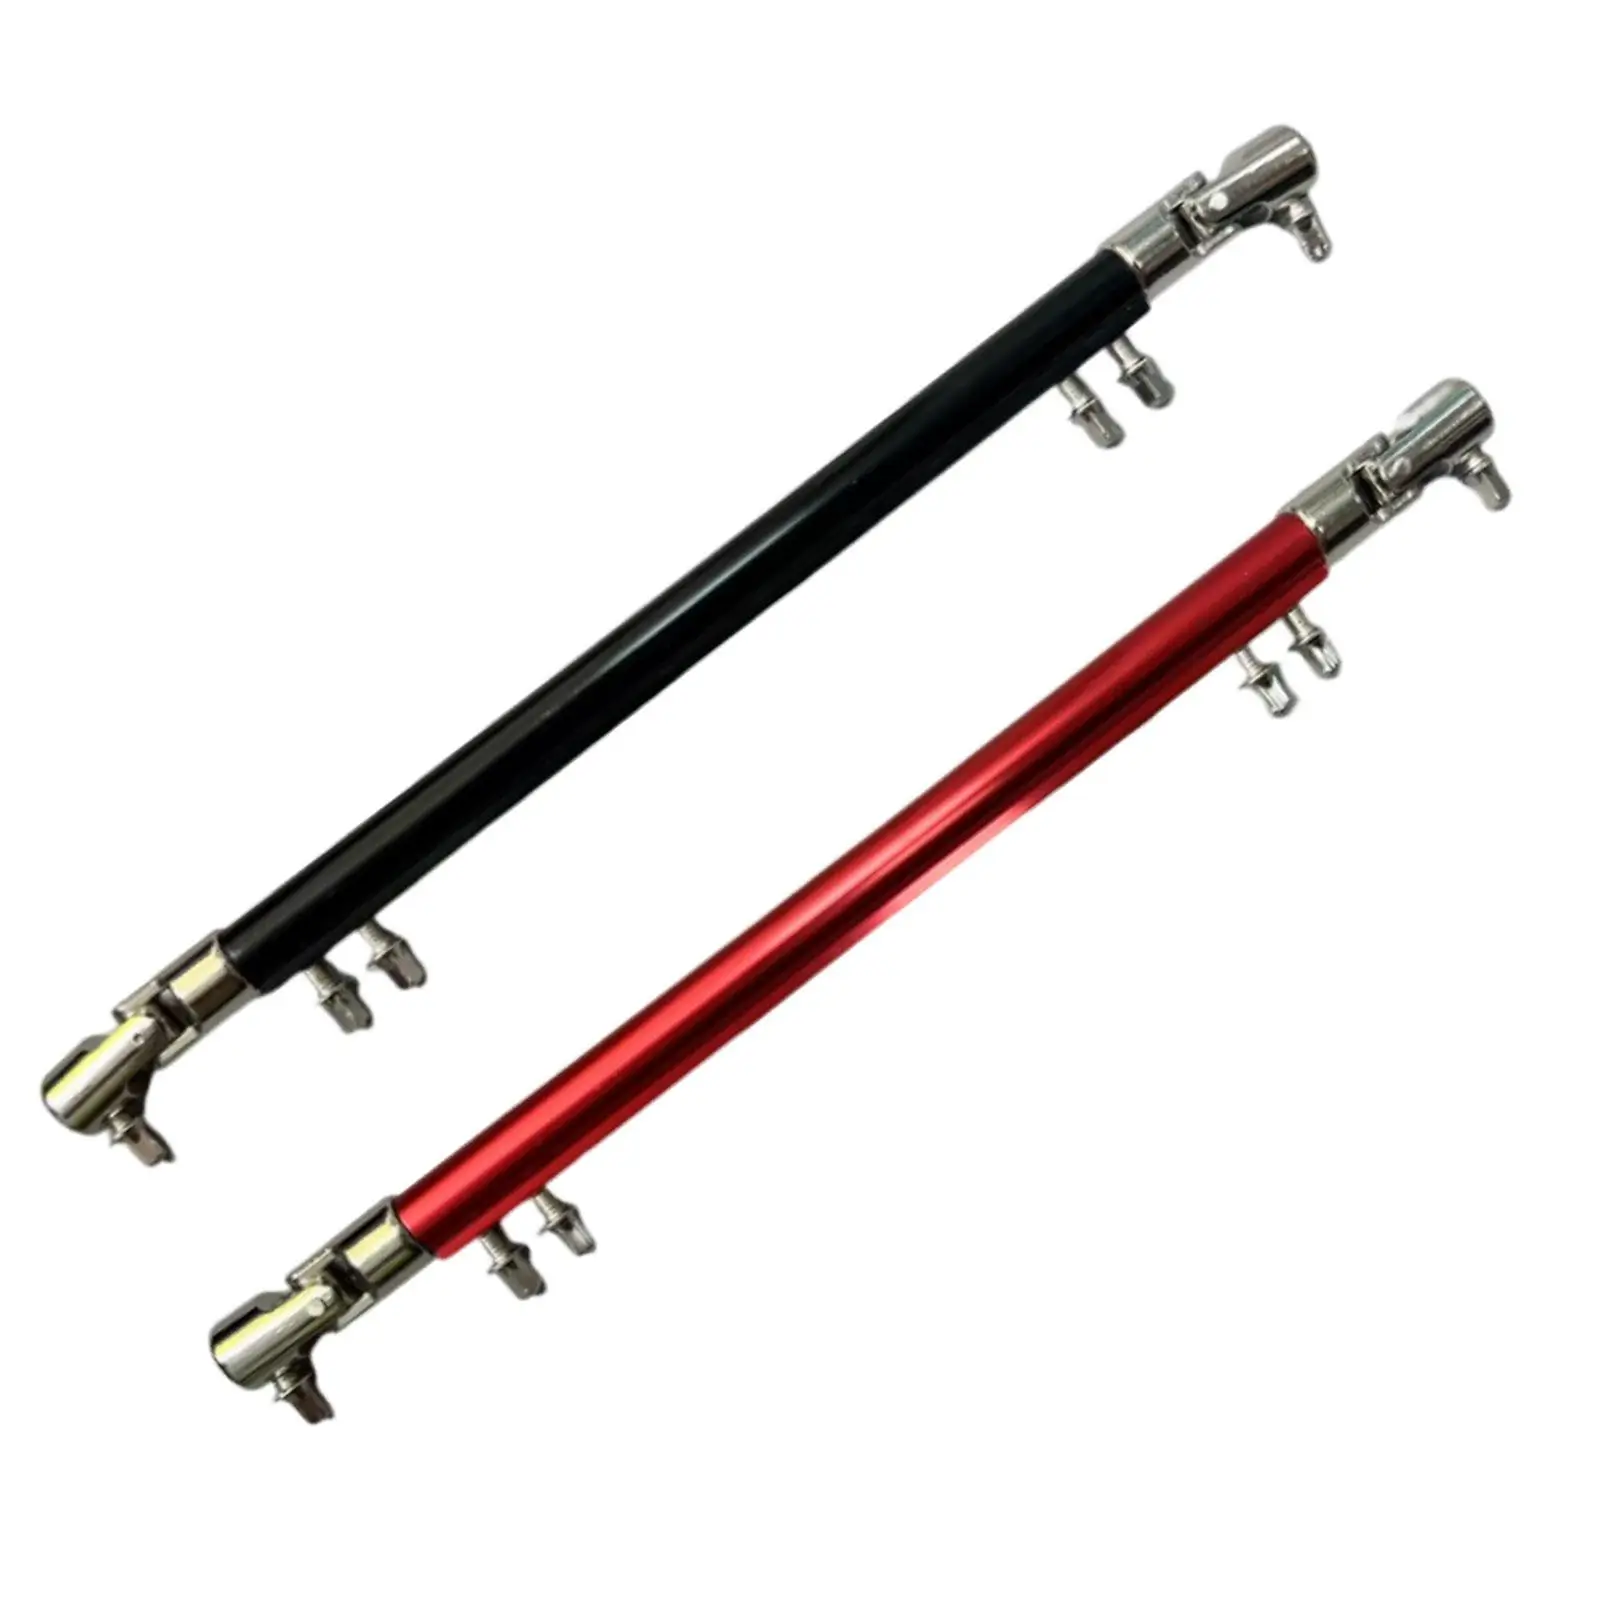 Double Foot Pedal Drive Shaft Rod Replacement Tight 13.82`` Double Drum Pedal Link Bar for Exercise Percussion Instrument Parts